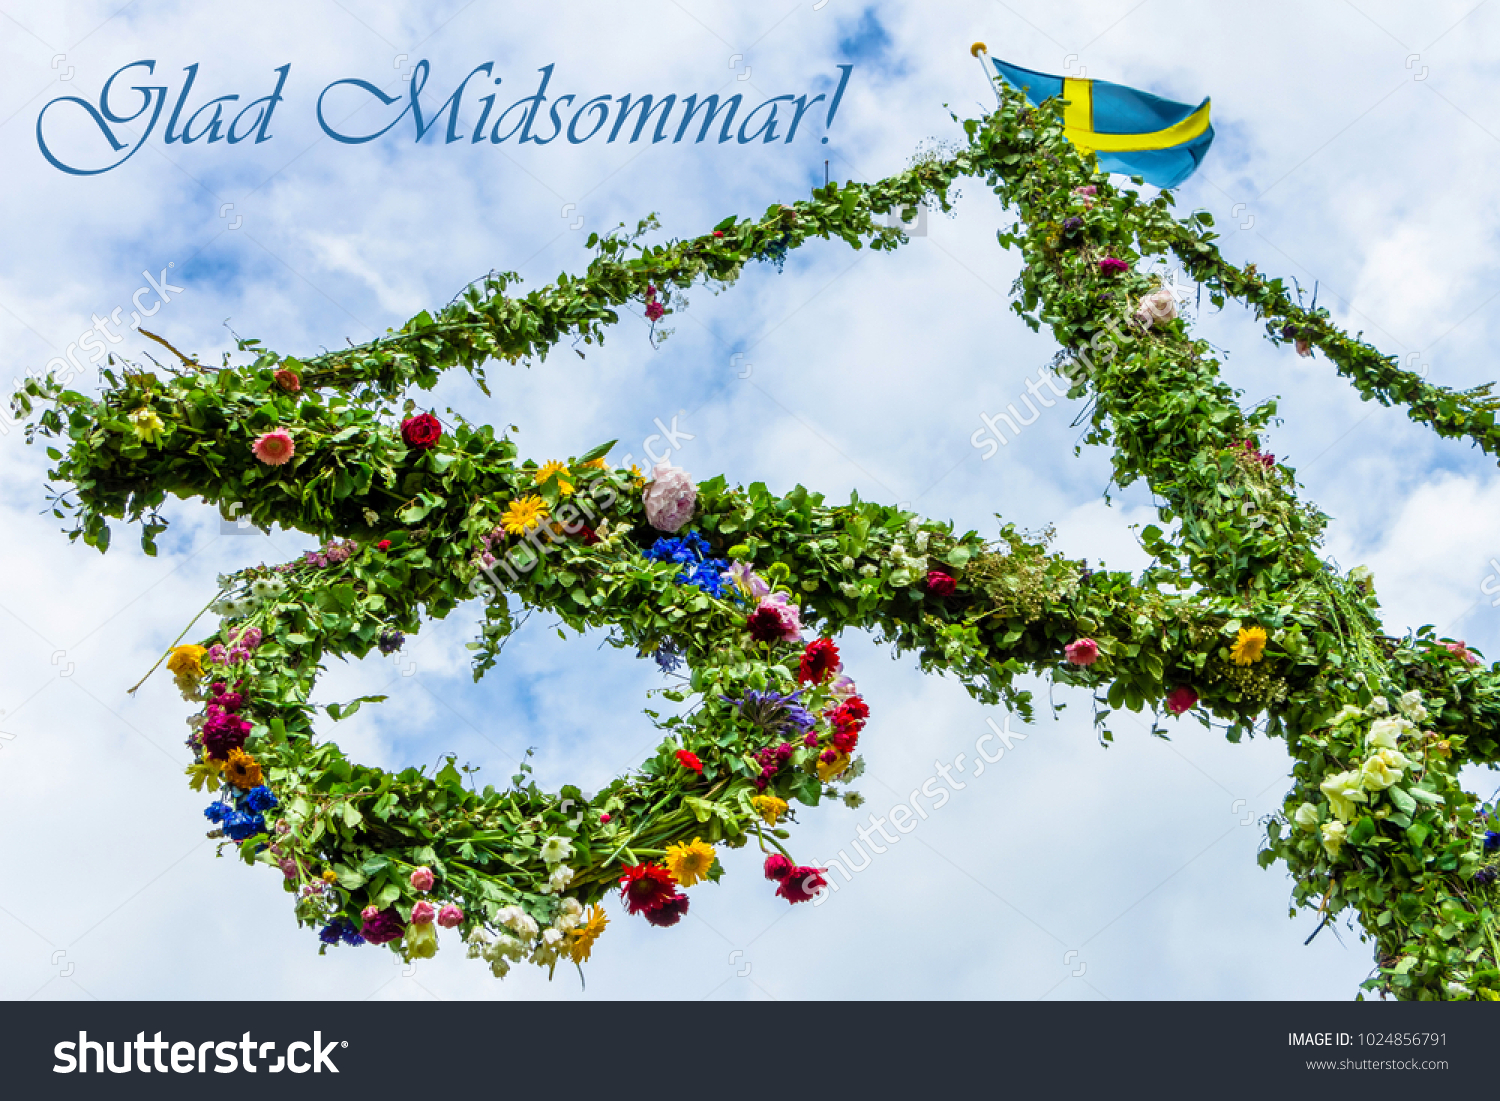 A pole and flag against blue sky and white clouds. A maypole decorated, covered in flowers and leaves. Pole after celebrating midsummer. Midsummer traditional Swedish symbol.  Kort Glad Midsommar. #1024856791